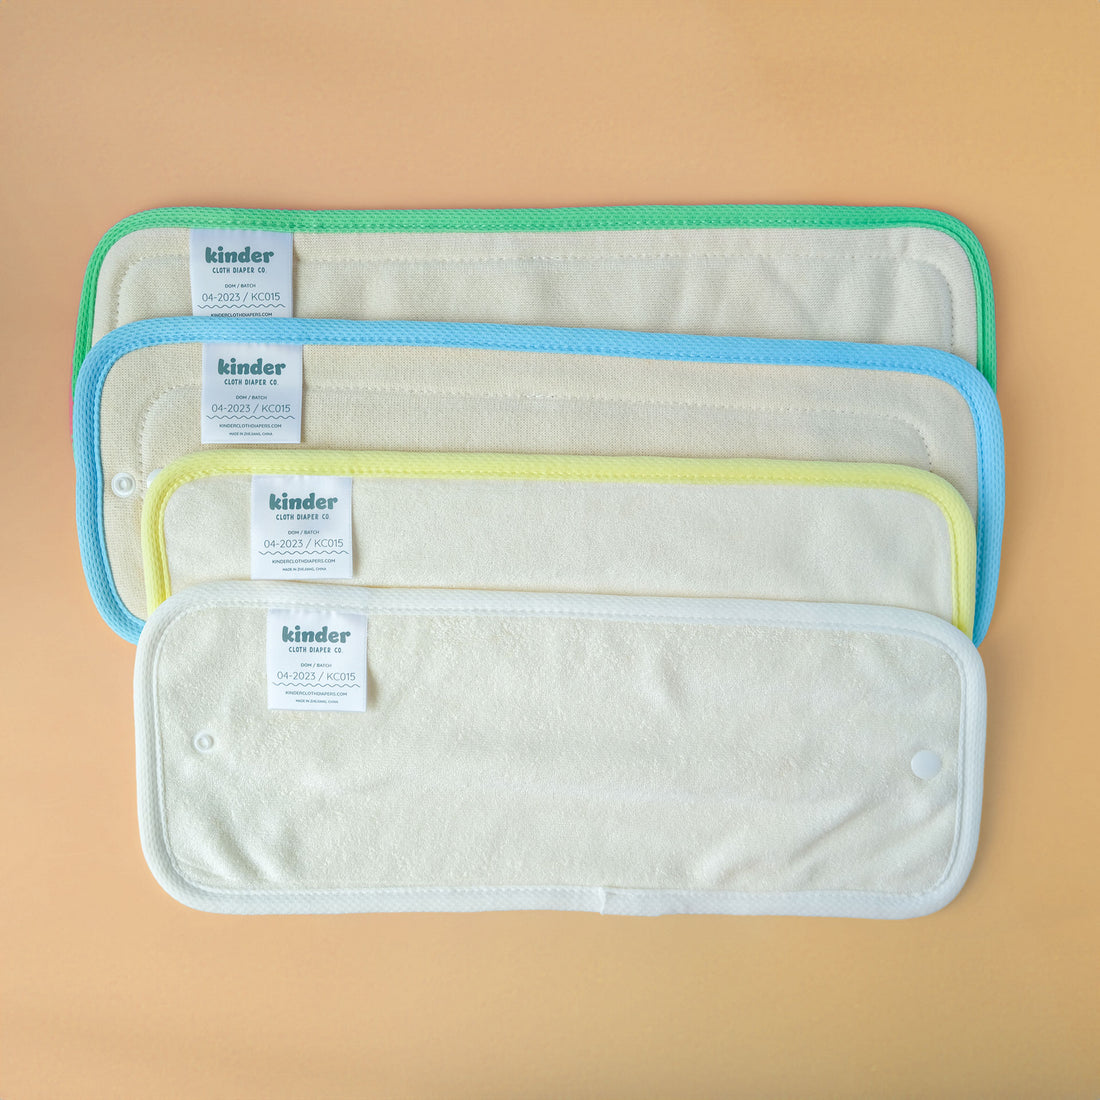 reusable cloth diaper insert system kinder cloth diaper company pittsburgh usa natural fiber absorbent best cloth diapers snap system easy to use hemp cotton bamboo